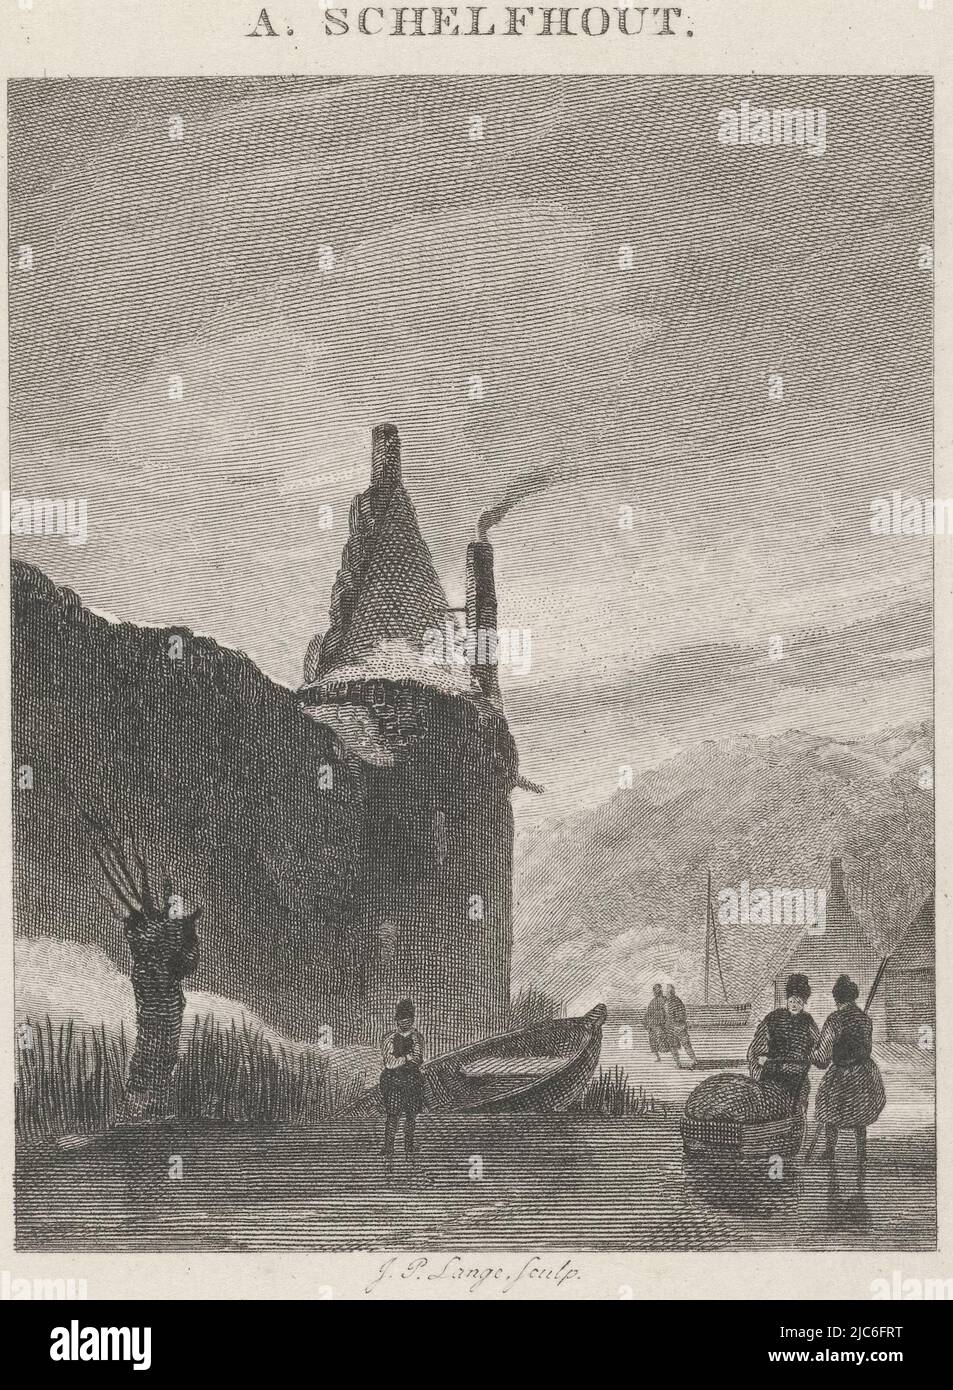 Winter view with figures and a sledge on the ice, on the left a village wall with a tower, Winter view A. Schelfhout , print maker: Johannes Philippus Lange, (mentioned on object), Andreas Schelfhout, (mentioned on object), 1820 - 1849, paper, steel engraving, h 135 mm × w 105 mm Stock Photo